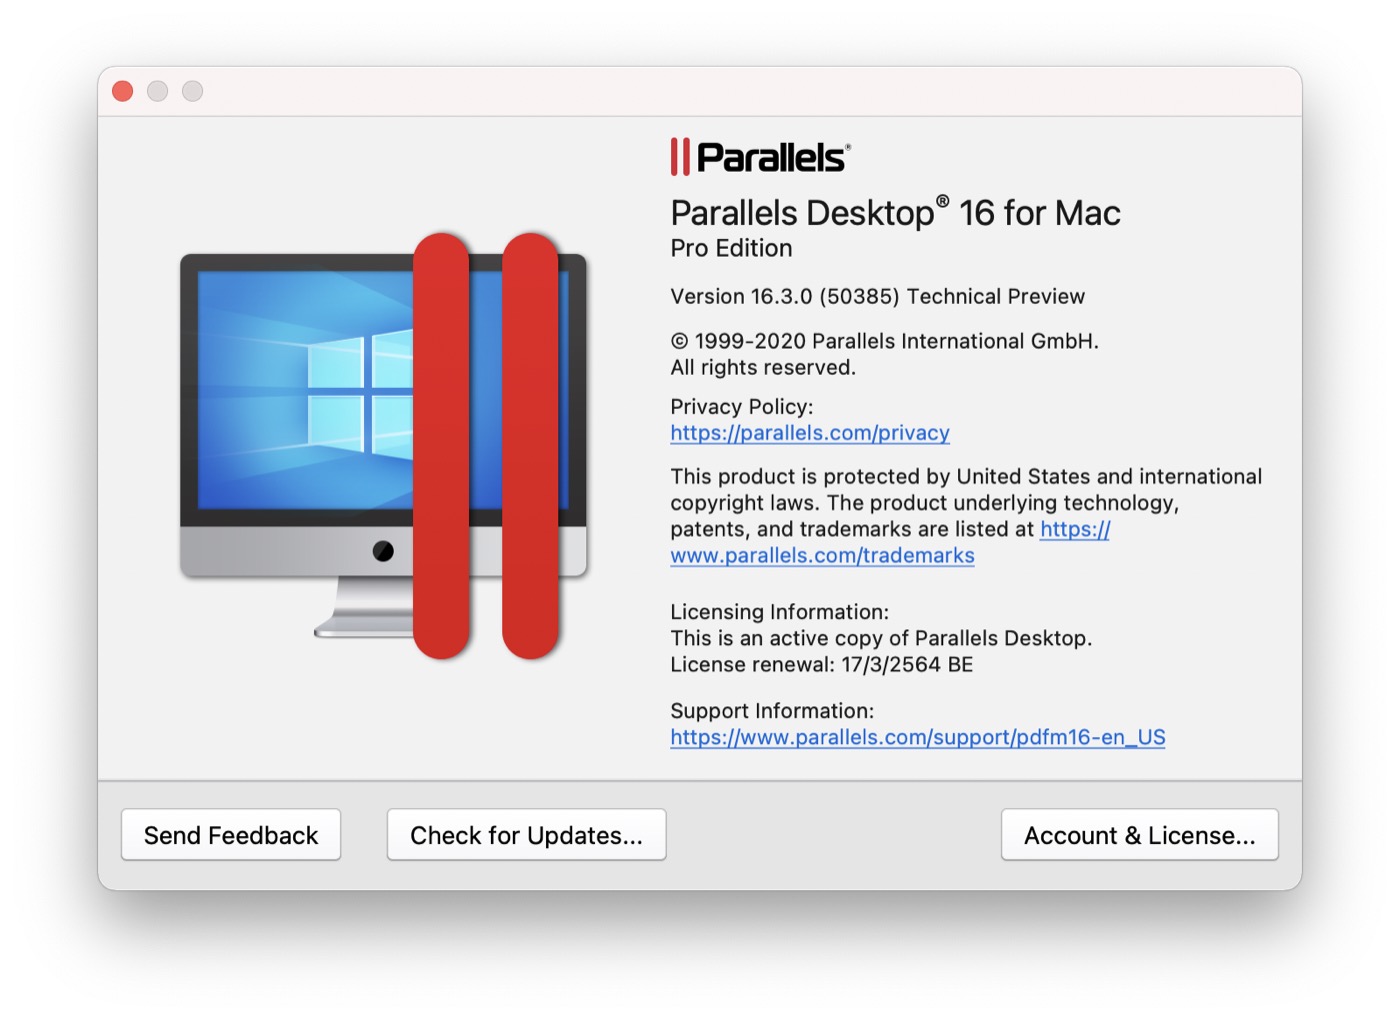 windows 10 for mac m1 parallels